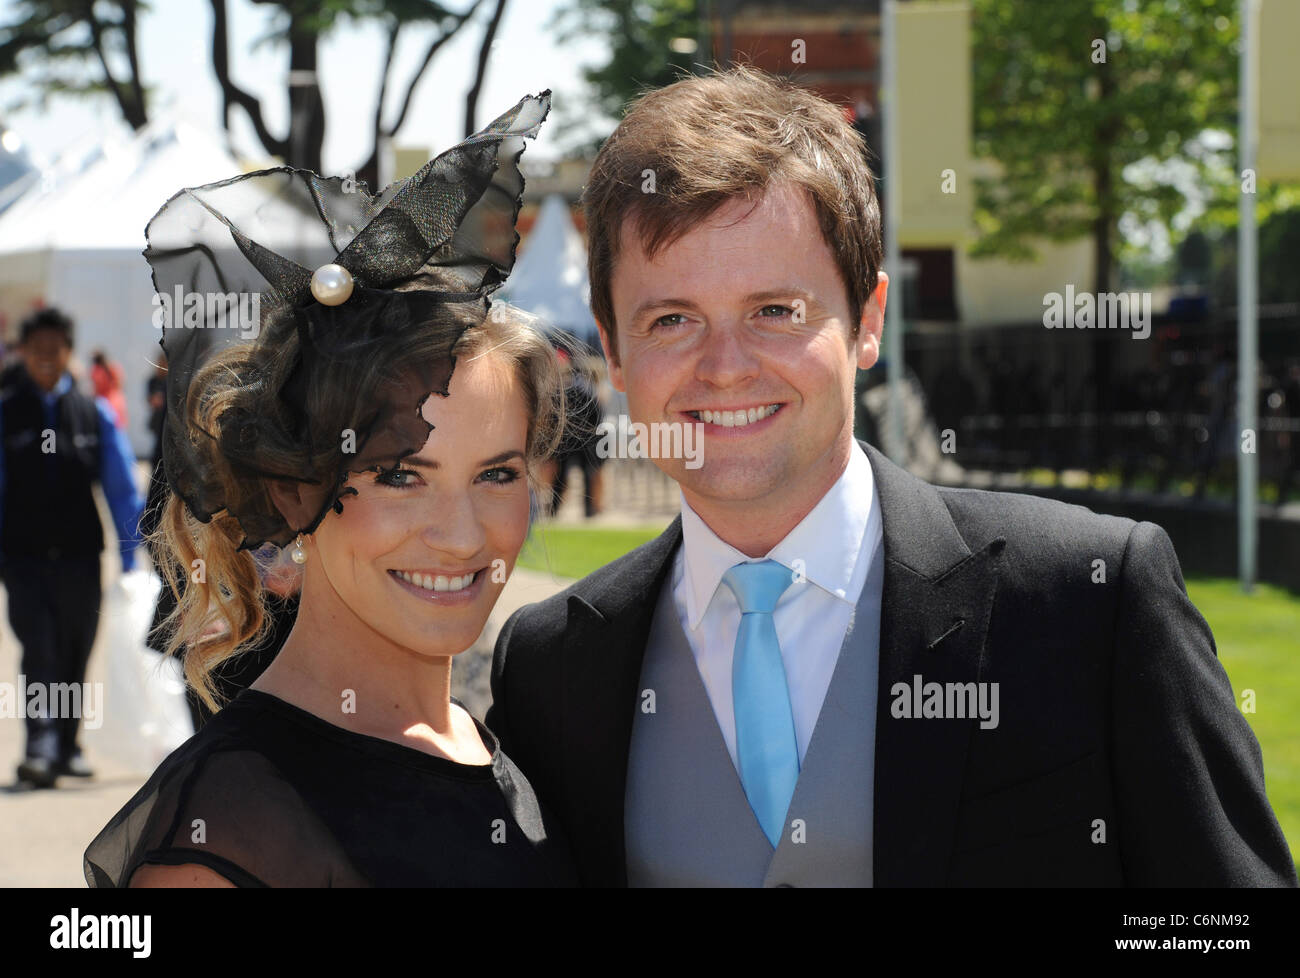 Declan Donnelly (Dec) and girlfriend Georgie Thompson arriving for Ladies Day at Royal Ascot - Berkshire, England - 17.06.10 Stock Photo